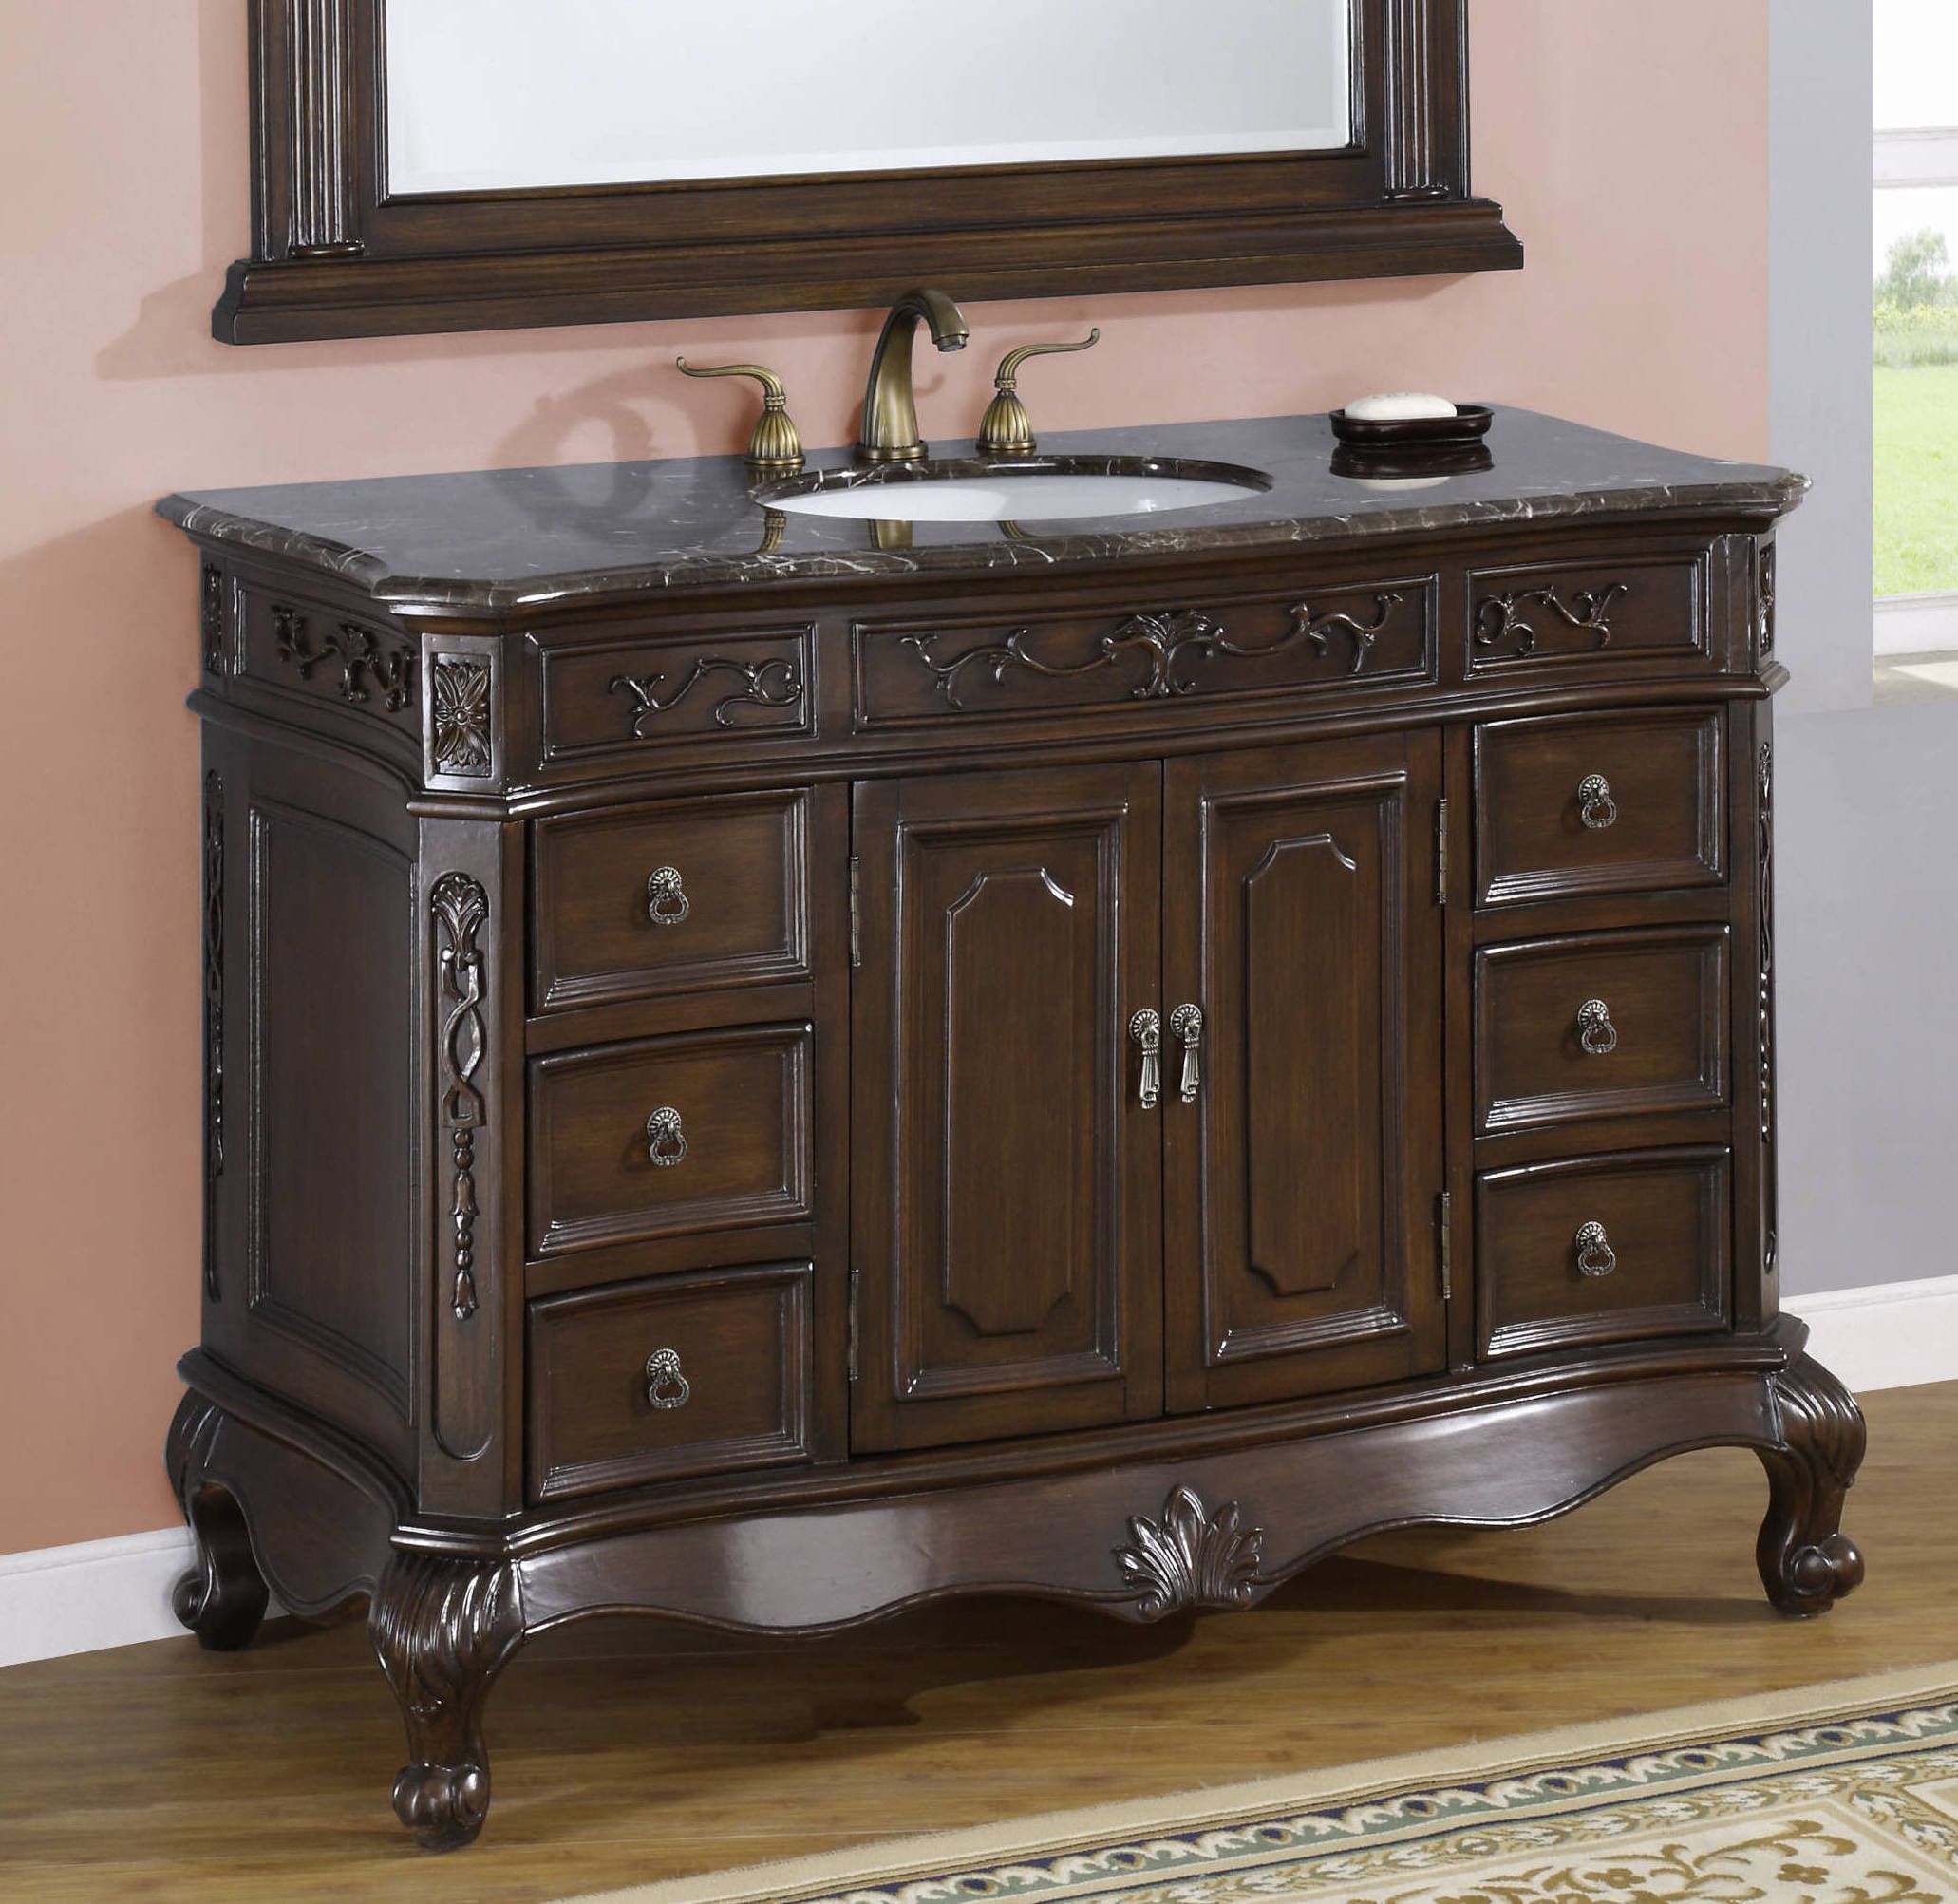 Carving On Bathroom Vintage Carving On Solid Oak Bathroom Vanity Cabinets With Metal Knobs And Granite Top Bathroom Beautiful Bathroom Vanity Cabinets For Any Style Of Decoration